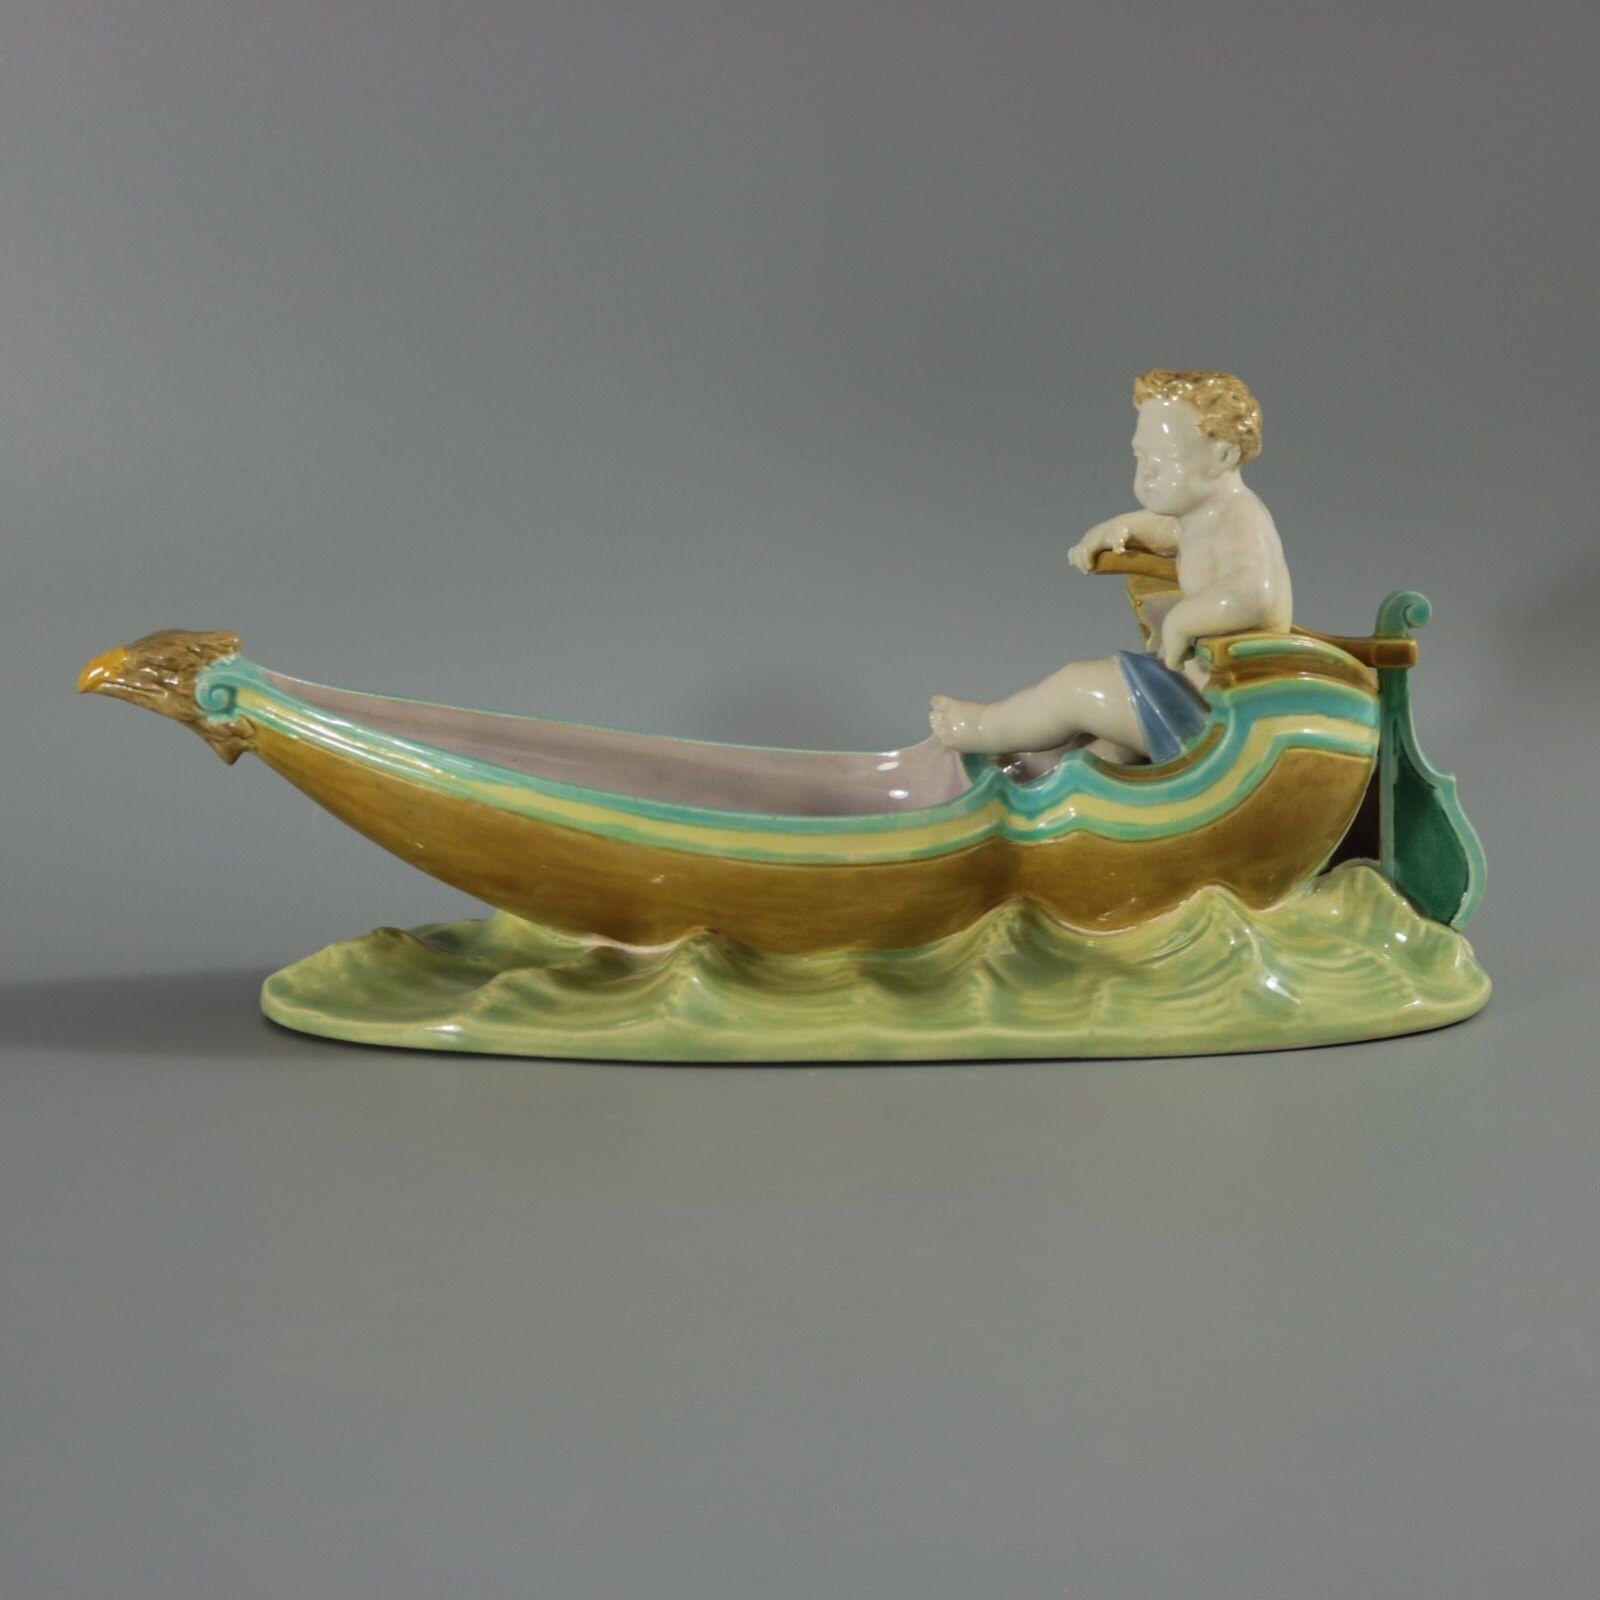 Royal Worcester Majolica figural dish which features a putto seated on a gondola boat, with an eagle figurehead. Colouration: turquoise, white, brown, are predominant. The piece bears maker's marks for the Royal Worcester pottery.